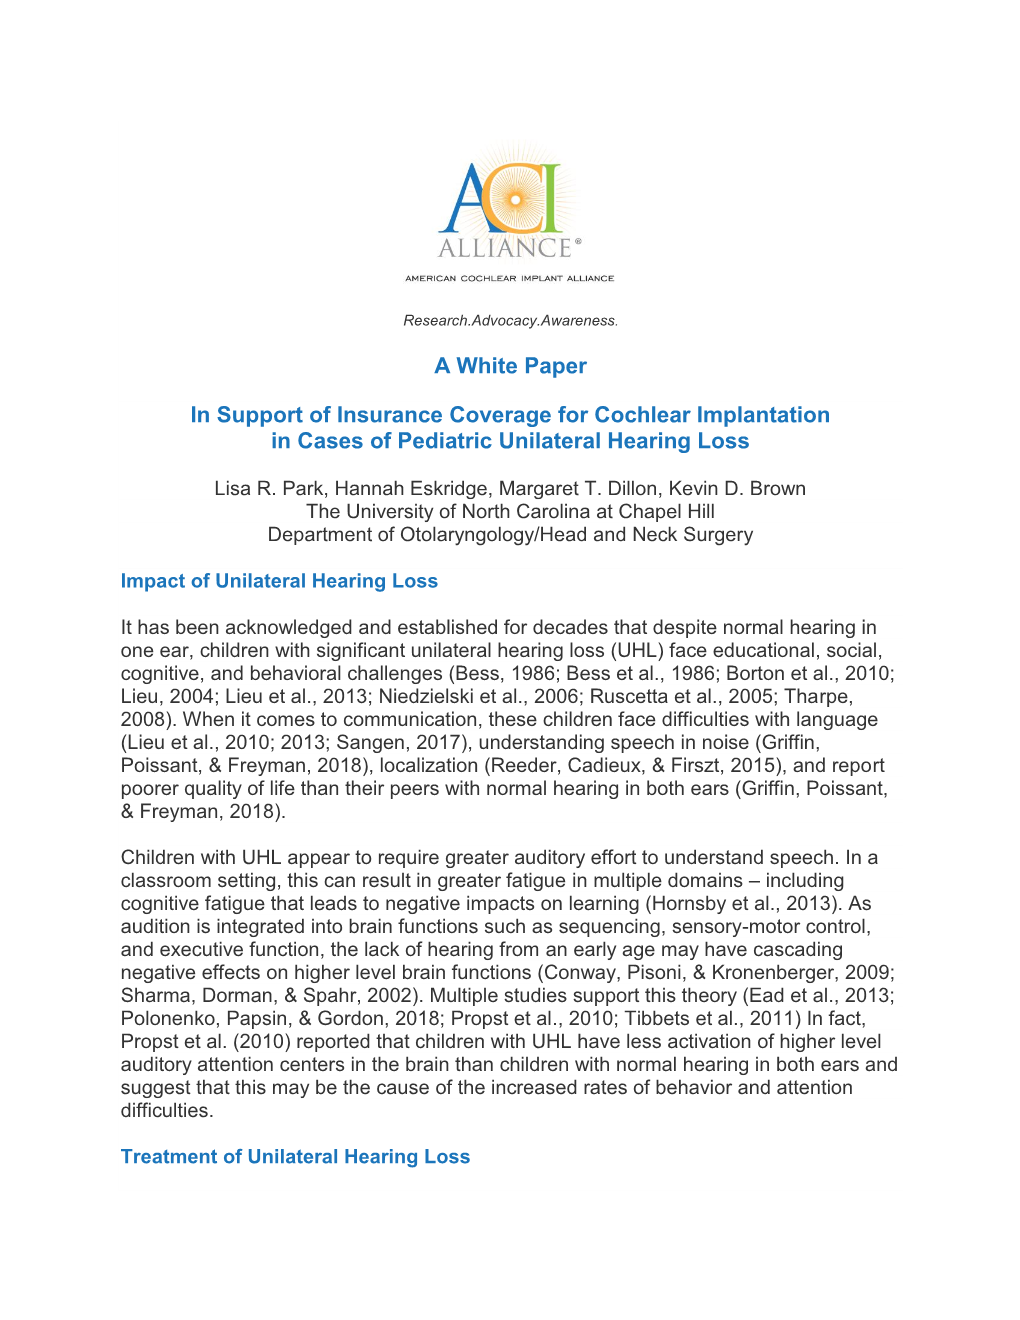 A White Paper in Support of Insurance Coverage for Cochlear